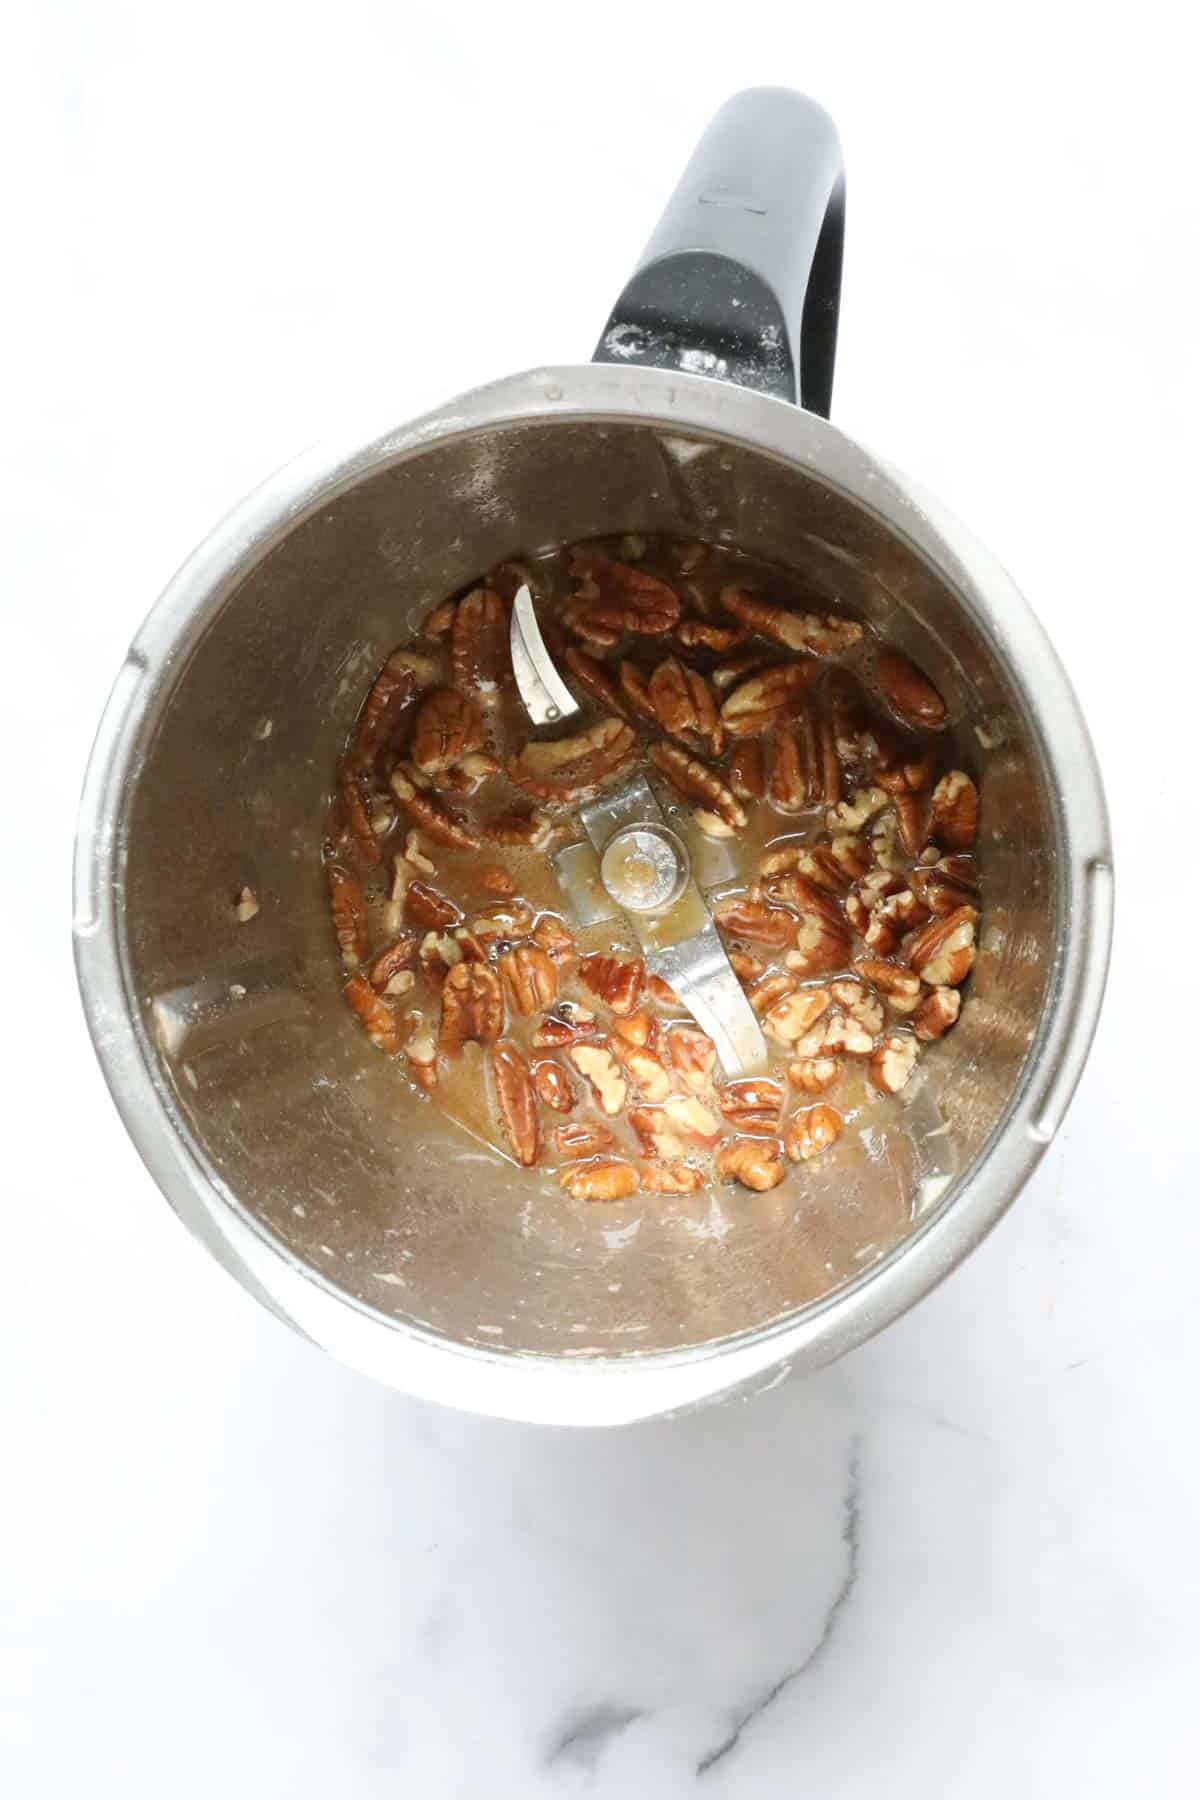 Pecans in a Thermomix bowl.